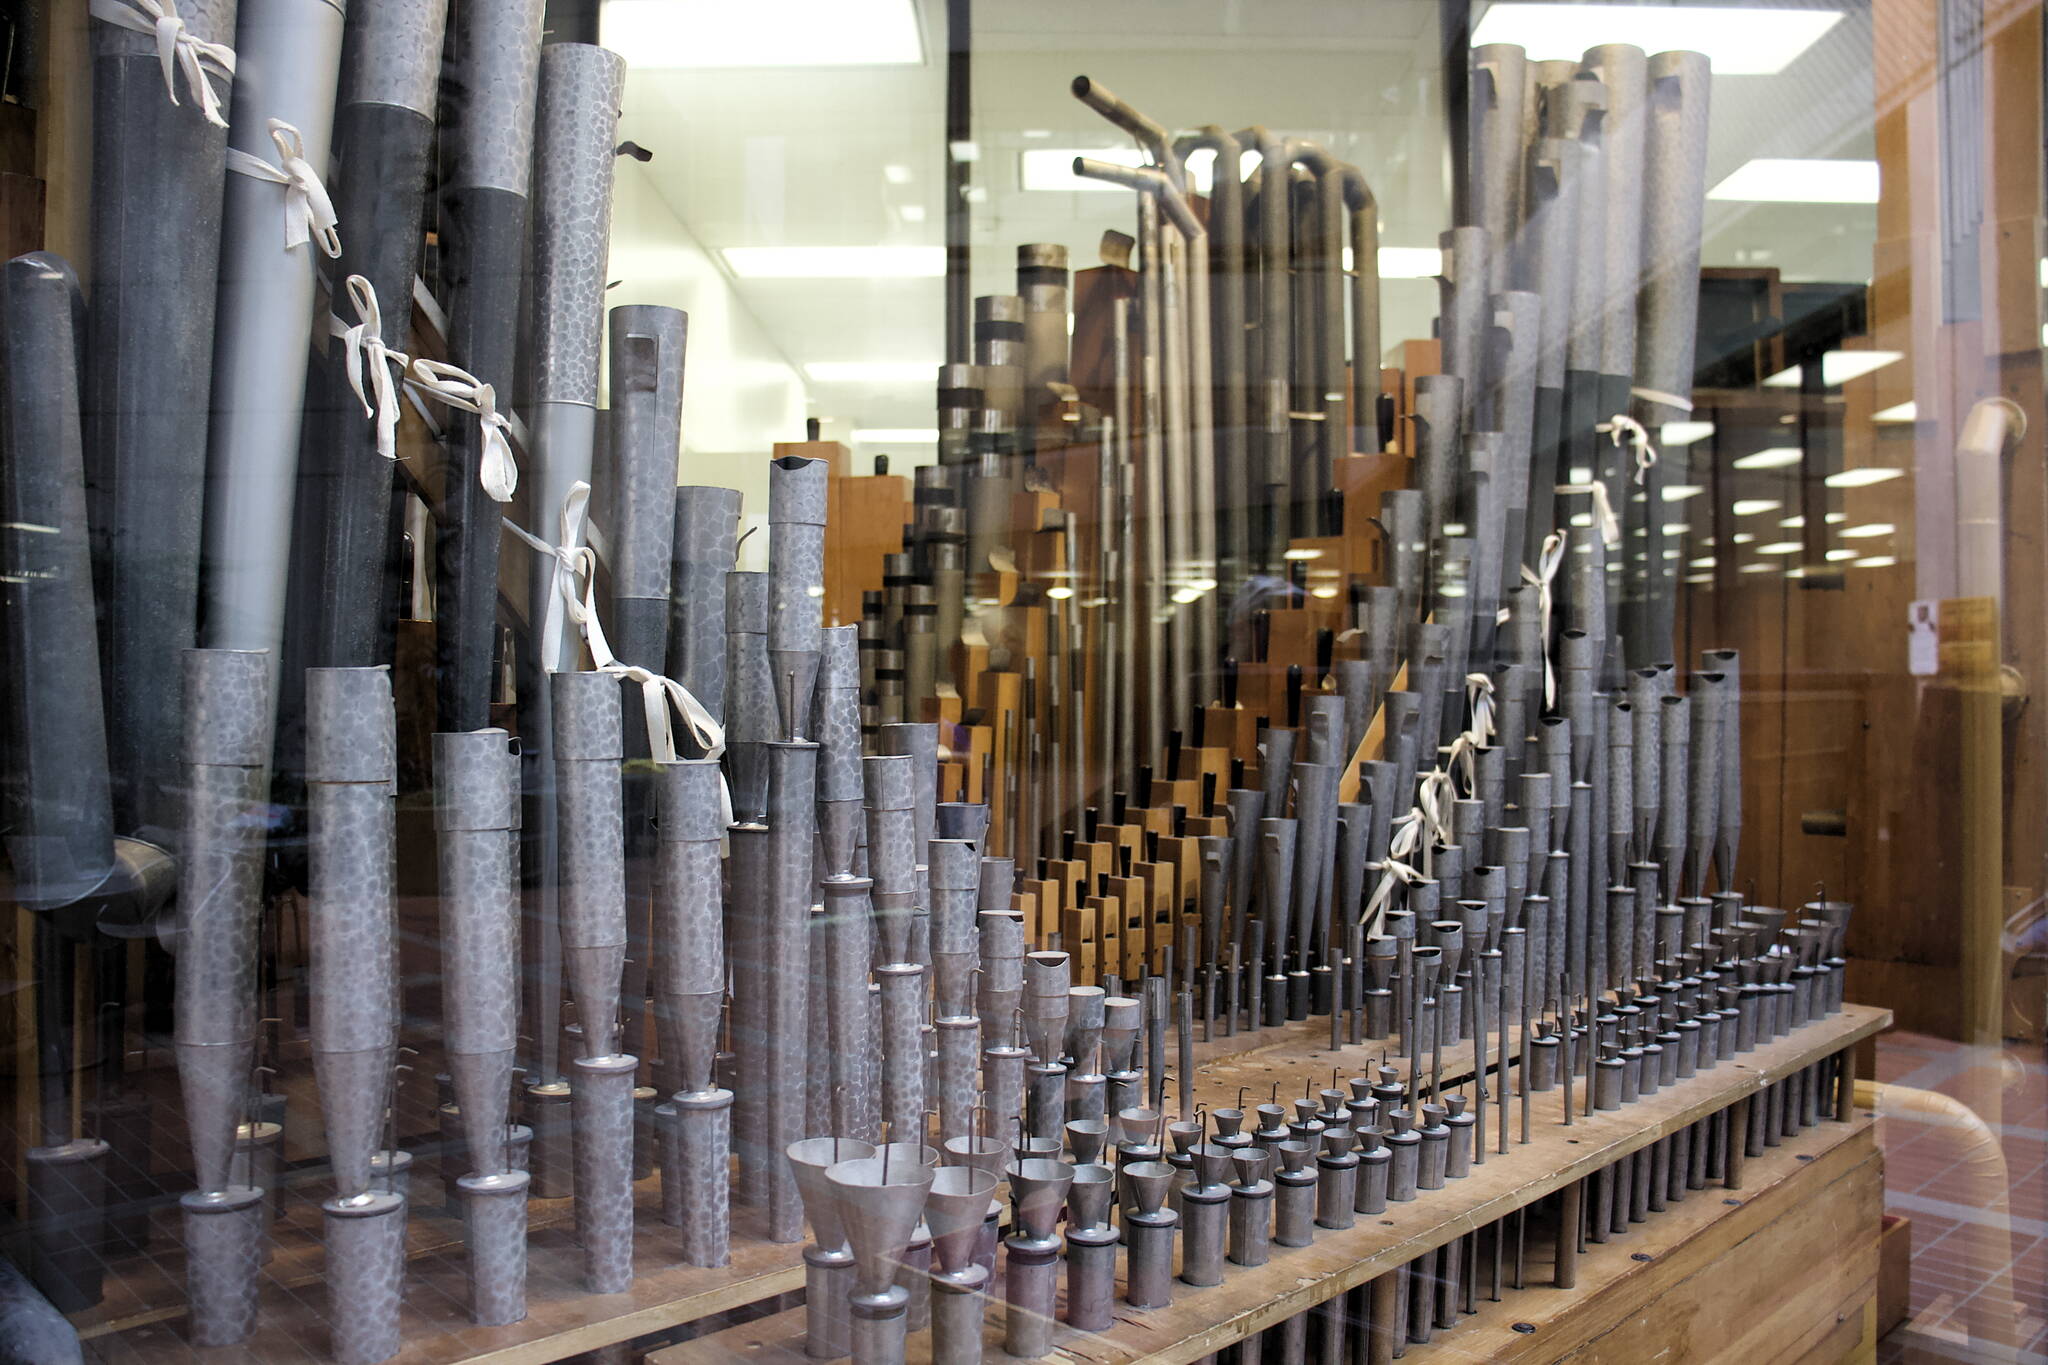 The 1928 Kimball Theatre Pipe Organ in the State Office Building has 548 pipes ranging from pencil-size to eight feet in length. (Mark Sabbatini / Juneau Empire)